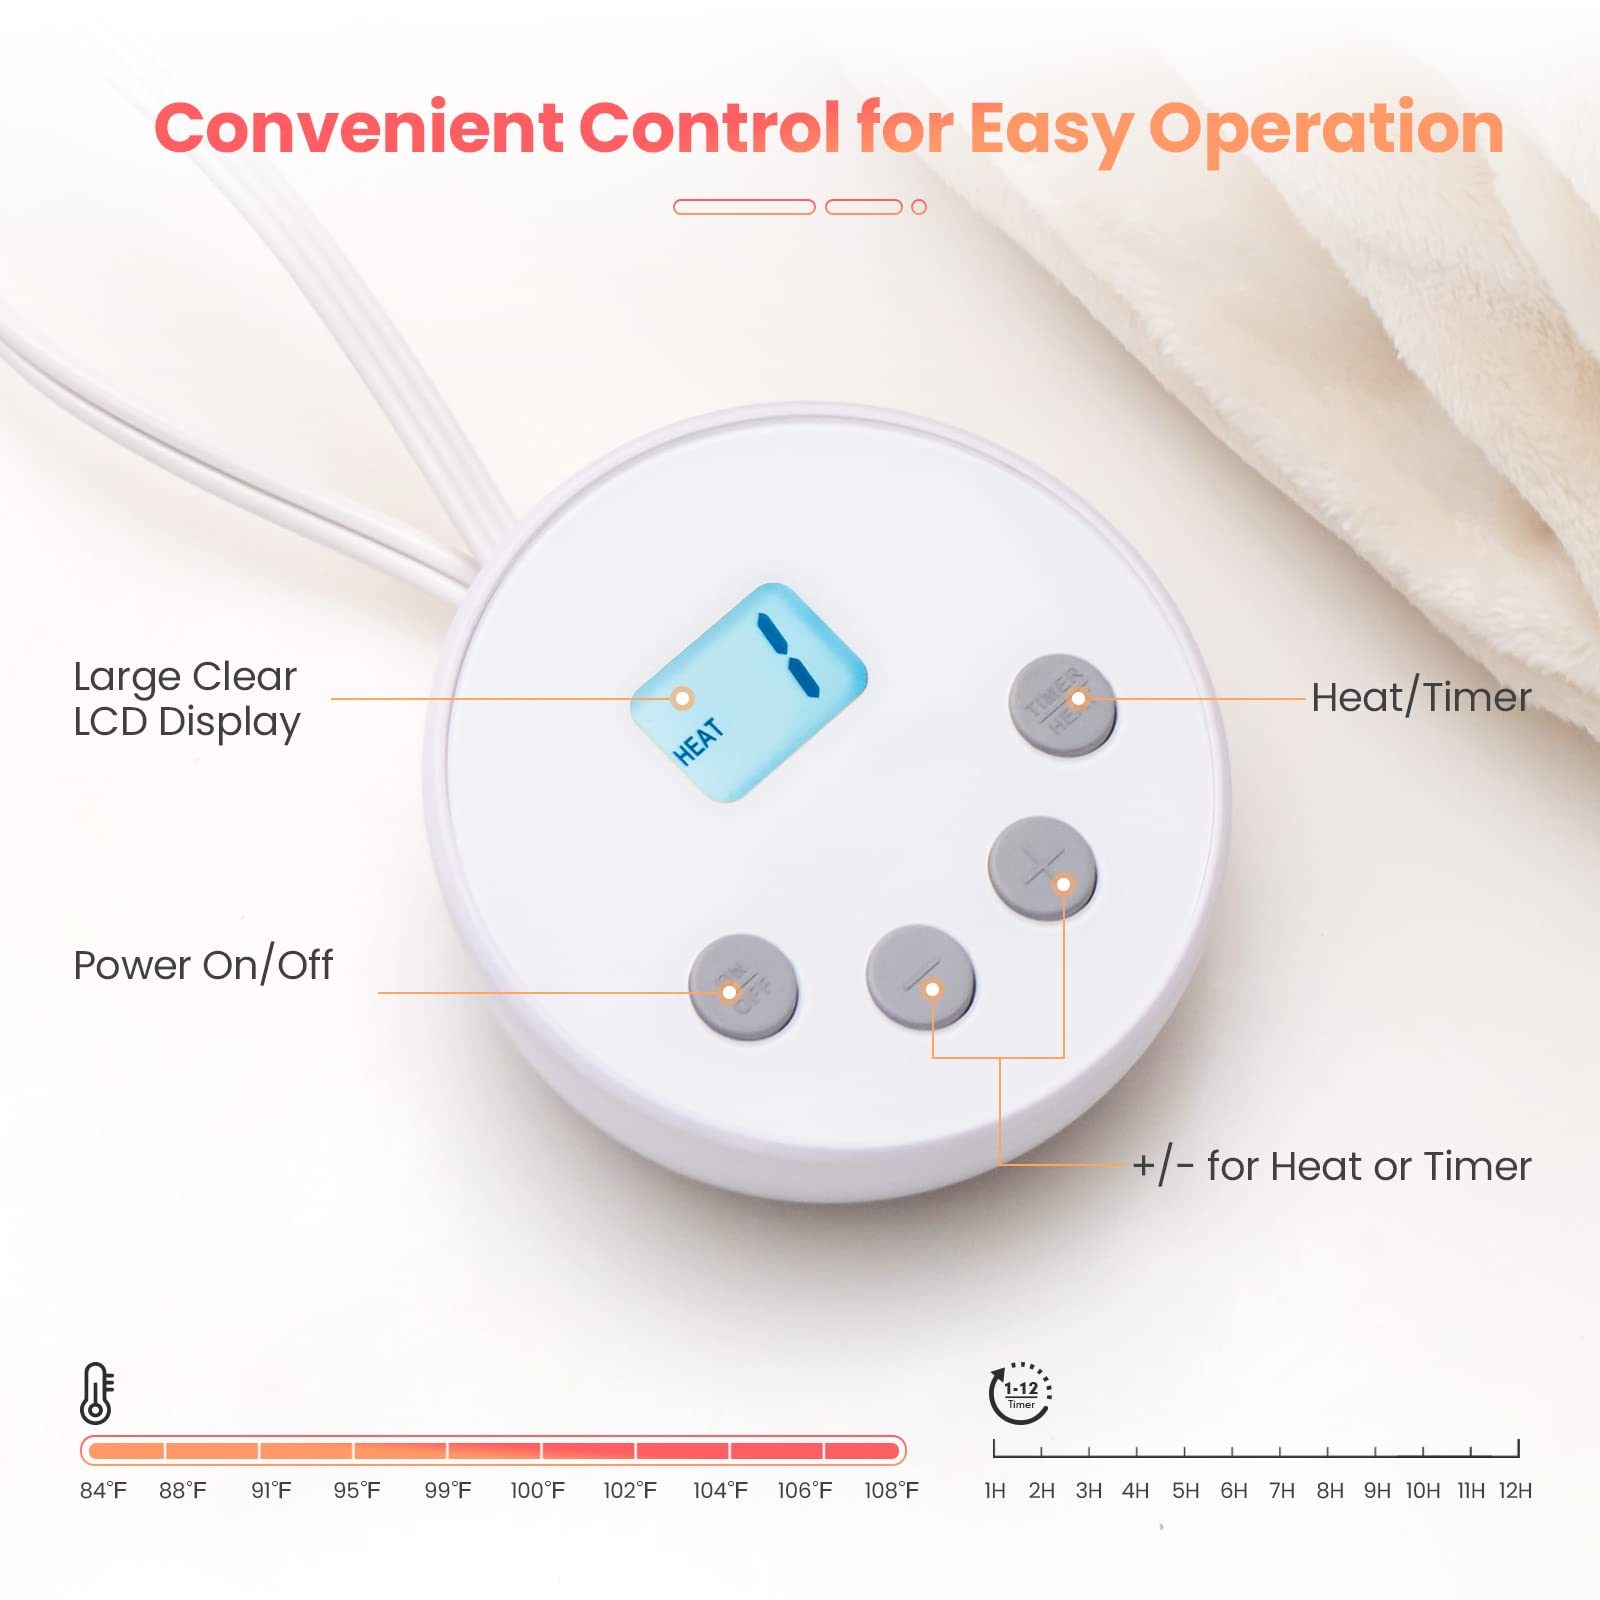 Fully Adjustable Heat and Auto-Off Timer: Our electric blanket offers a wide range of 10 temperature settings, allowing you to choose your preferred warmth level, from a cozy 77 ℉ to a toasty 115 ℉. With the built-in timer function (1-12 hours), you can enjoy a worry-free nap or night's sleep as it automatically turns off.